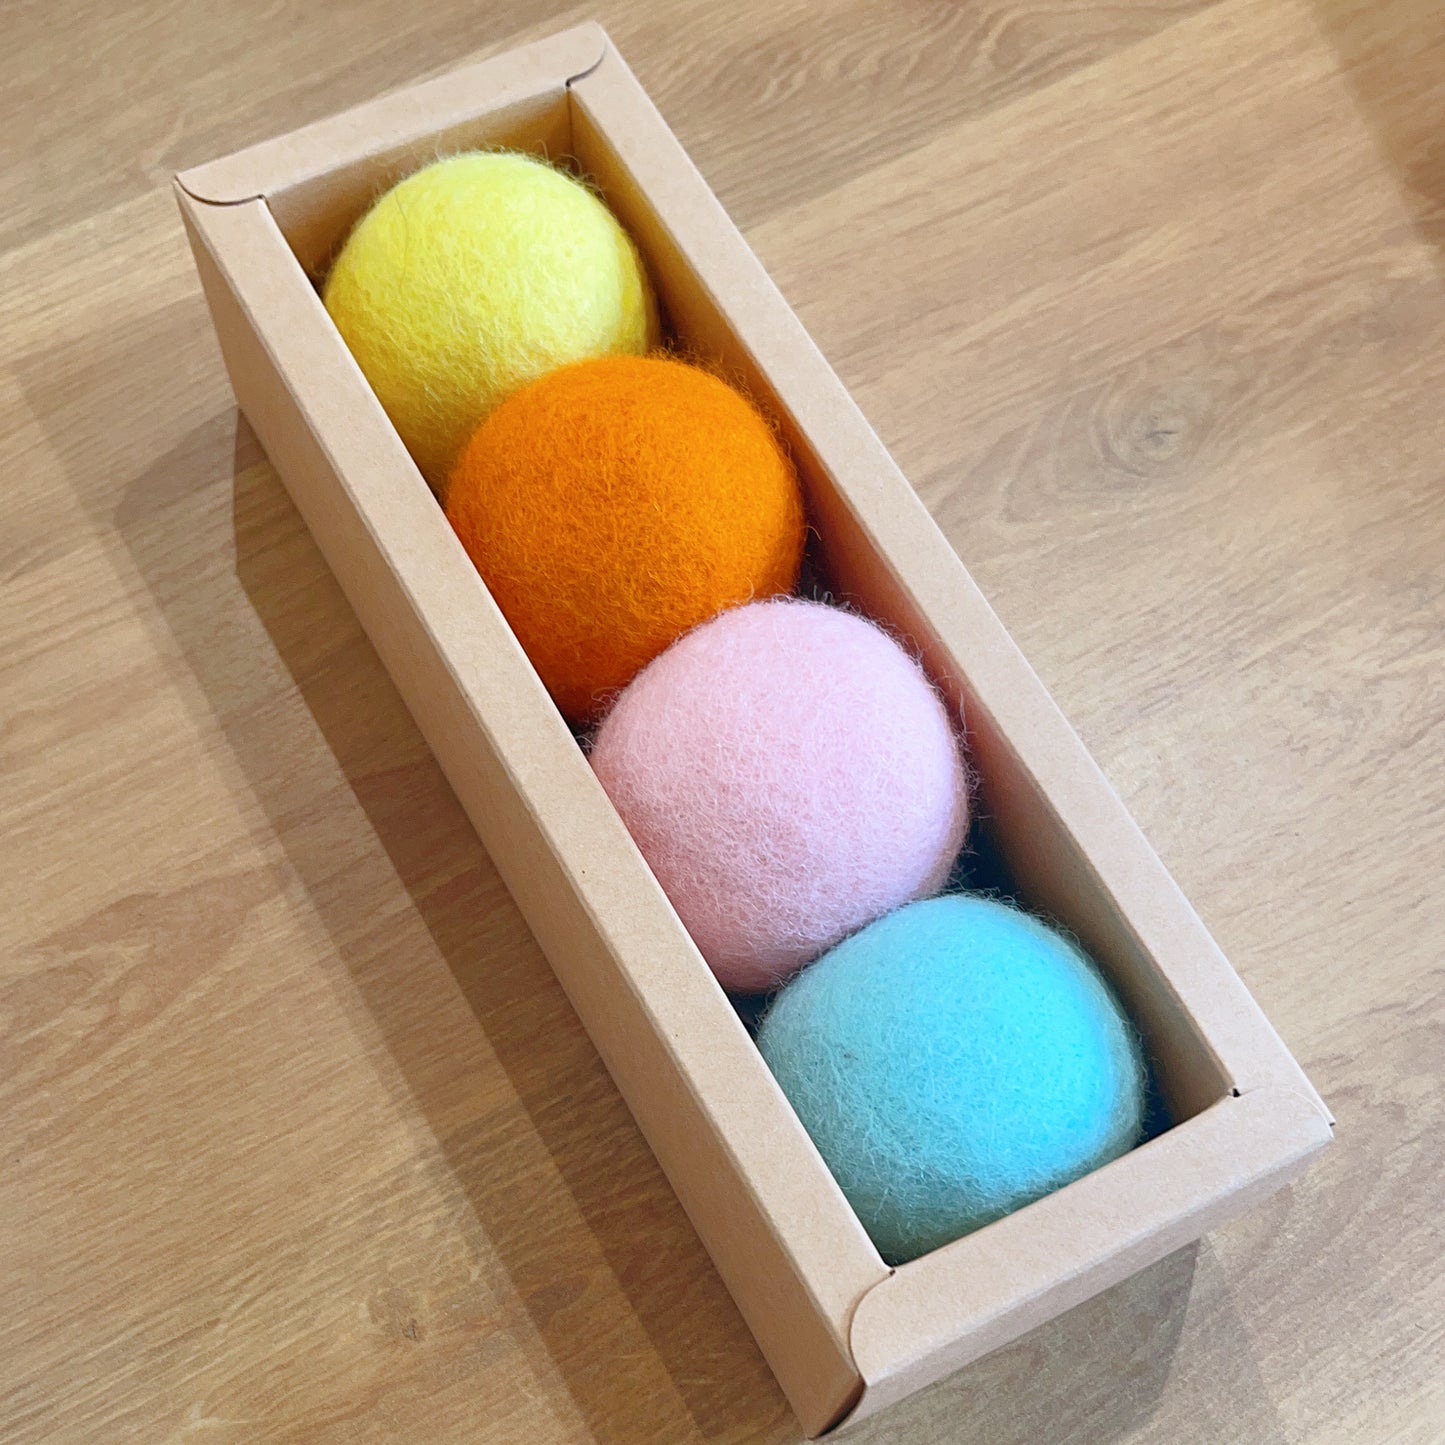 Pure Wool Ball Cat Toys